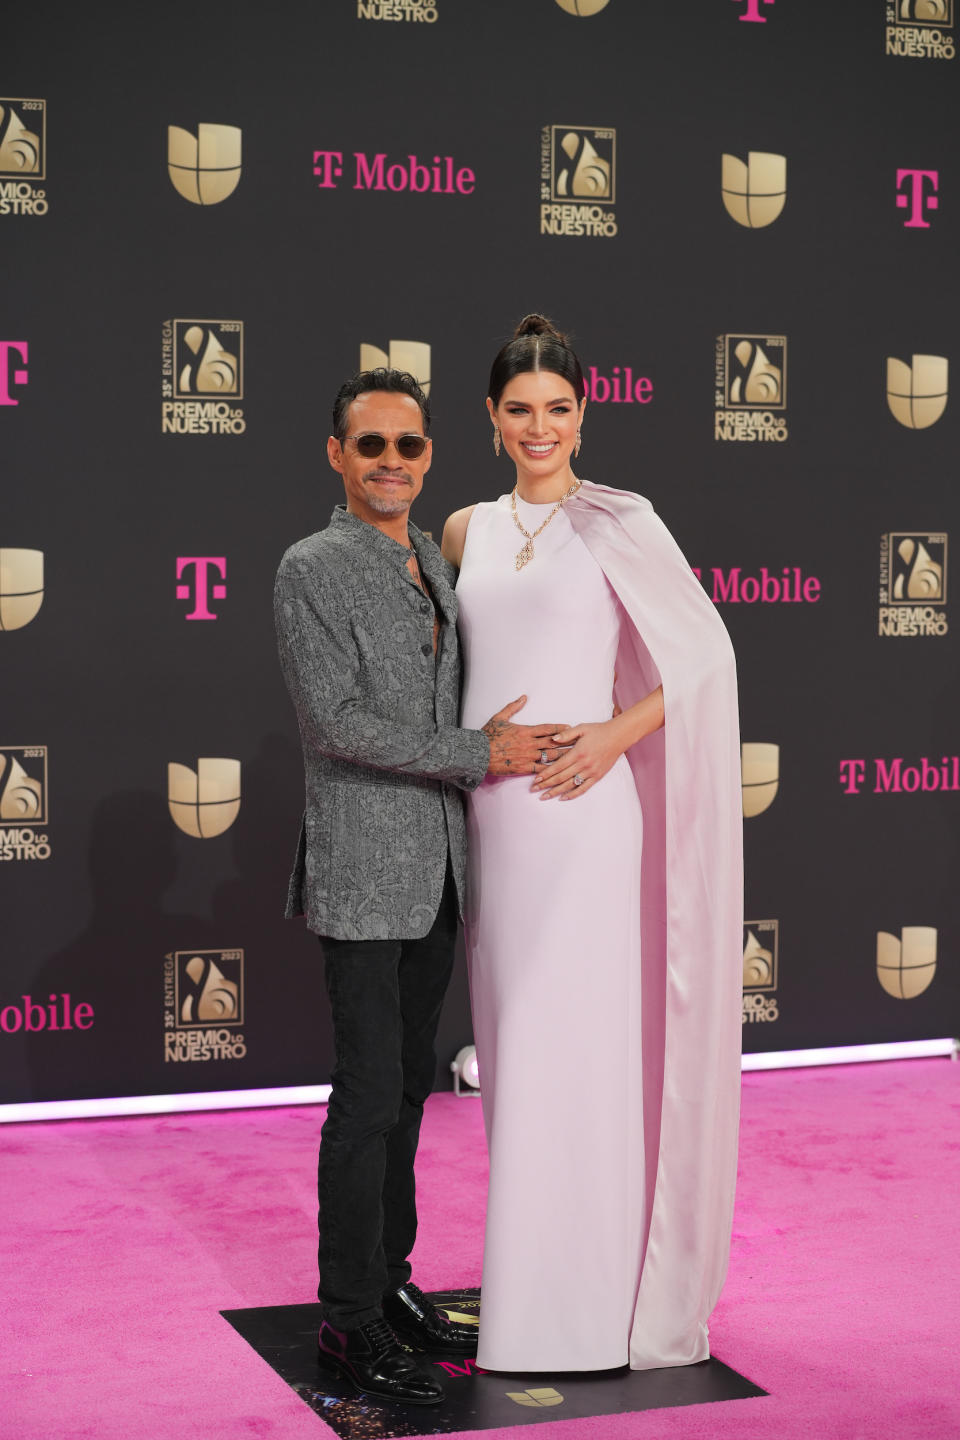 The couple made quite the stunning appearance at the Florida awards show on Feb. 23, 2023. (Courtesy Univision)